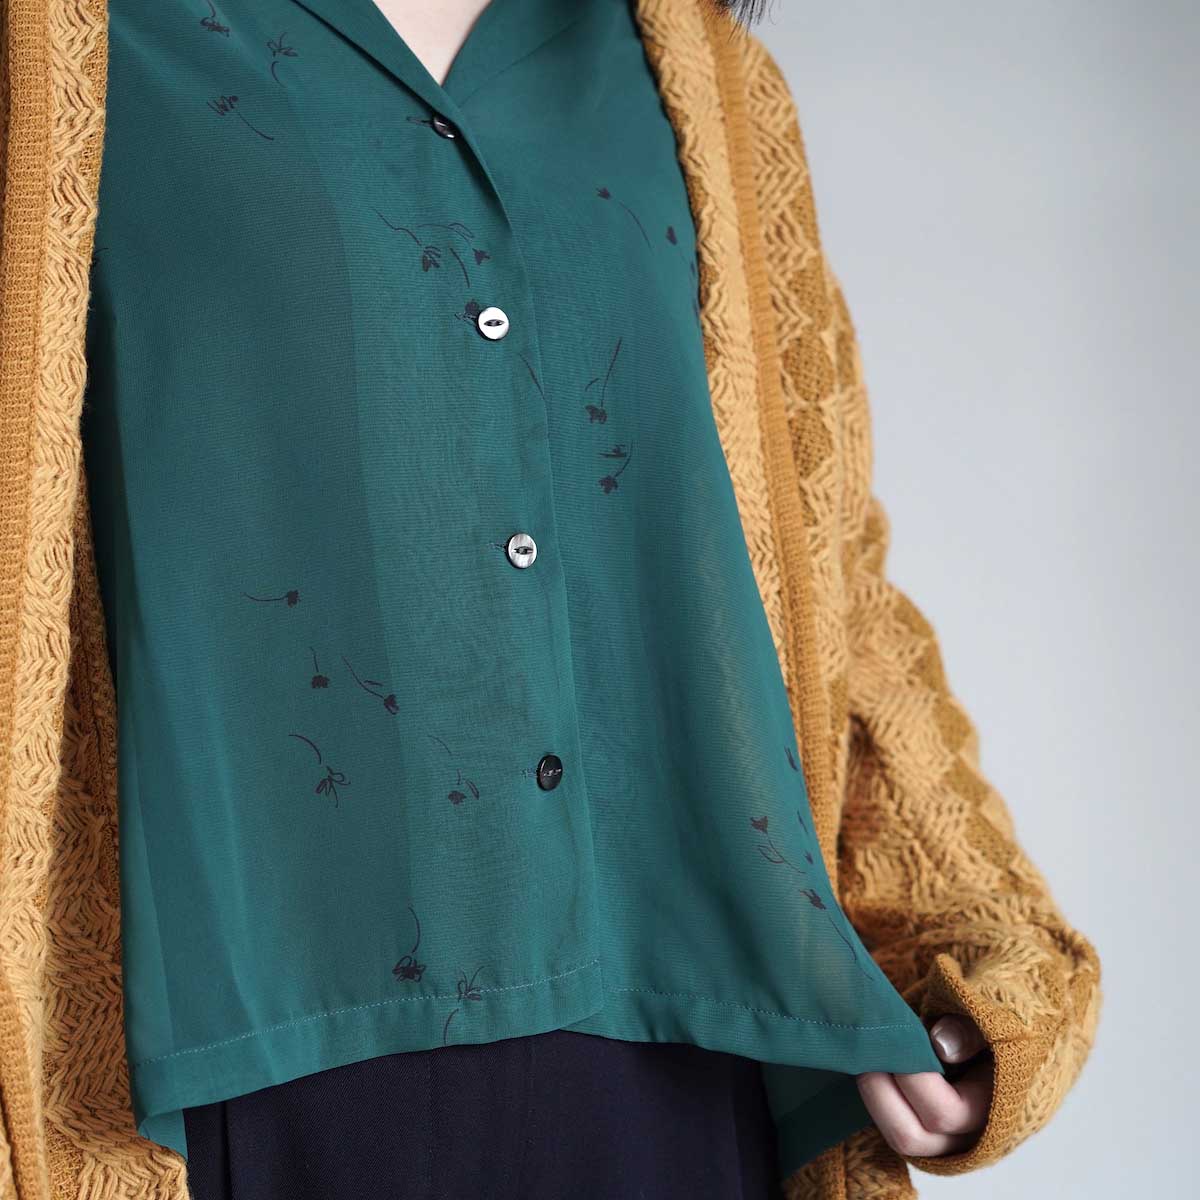 Needles / Gathered Blouse - Poly Chiffon / Floral Printed (Green) 身長159cm 着用②